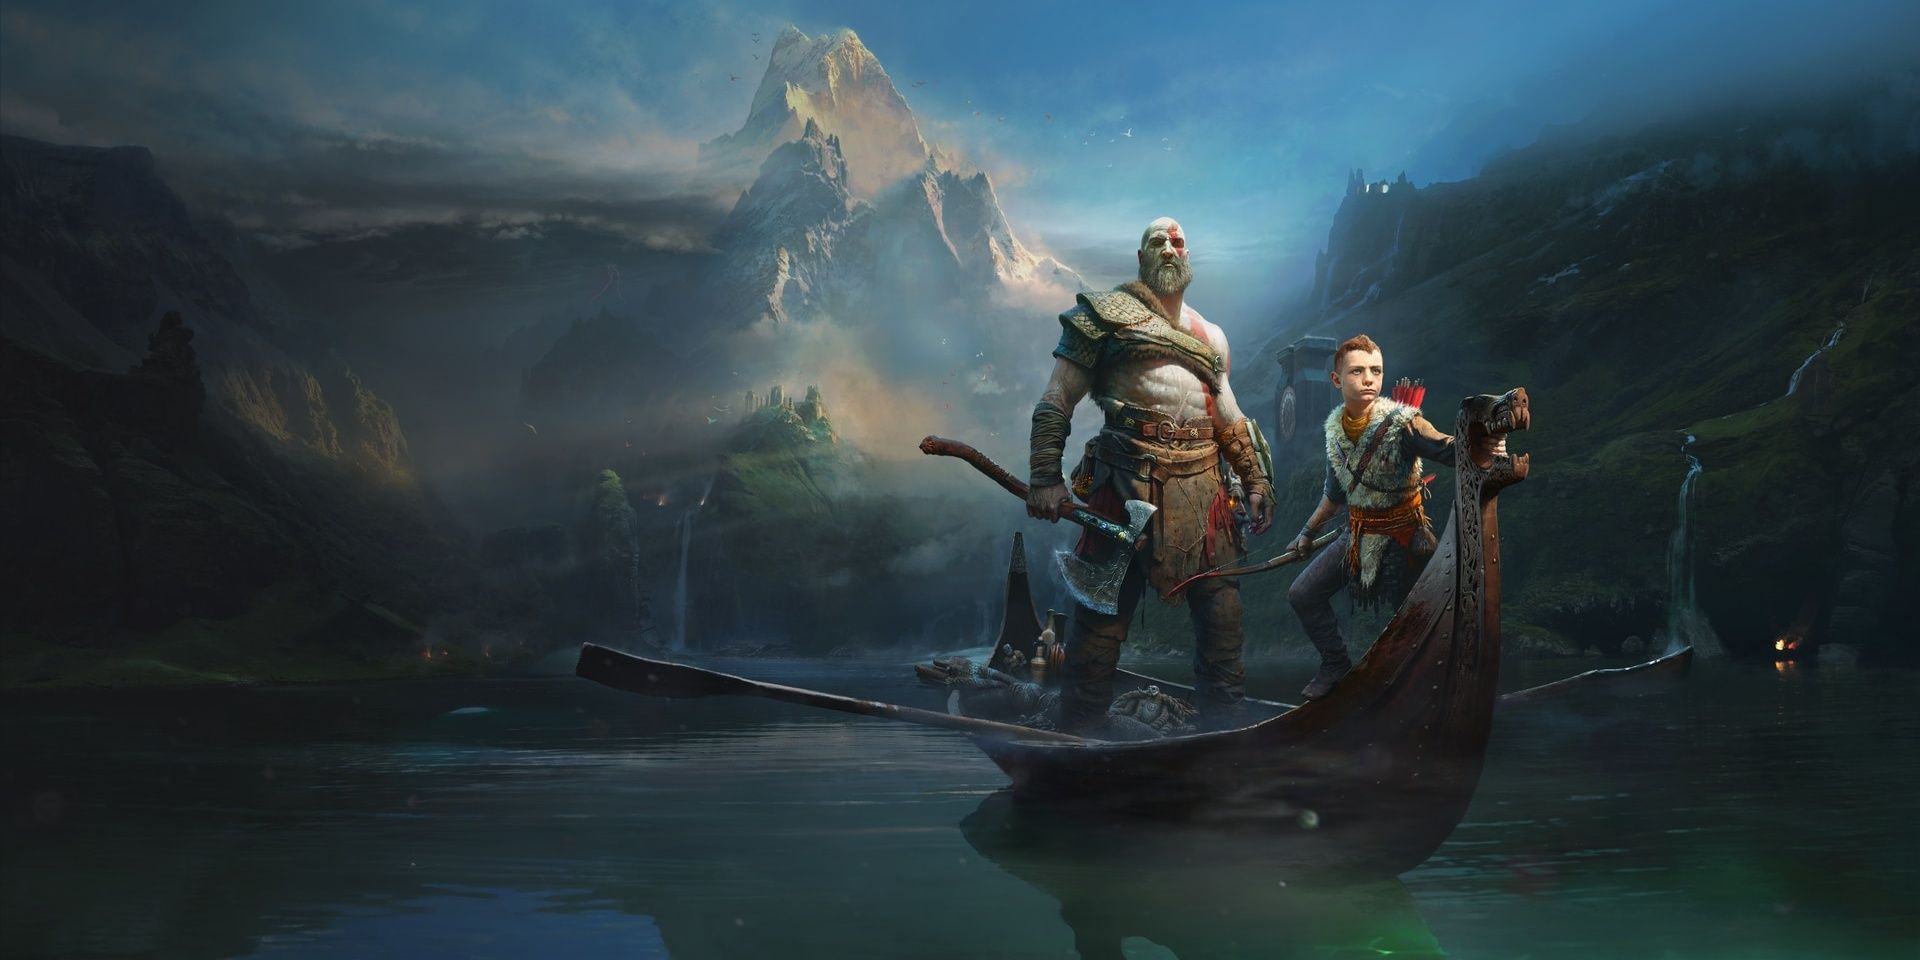 Kratos and Loki embark in front of the Thundering Mountains